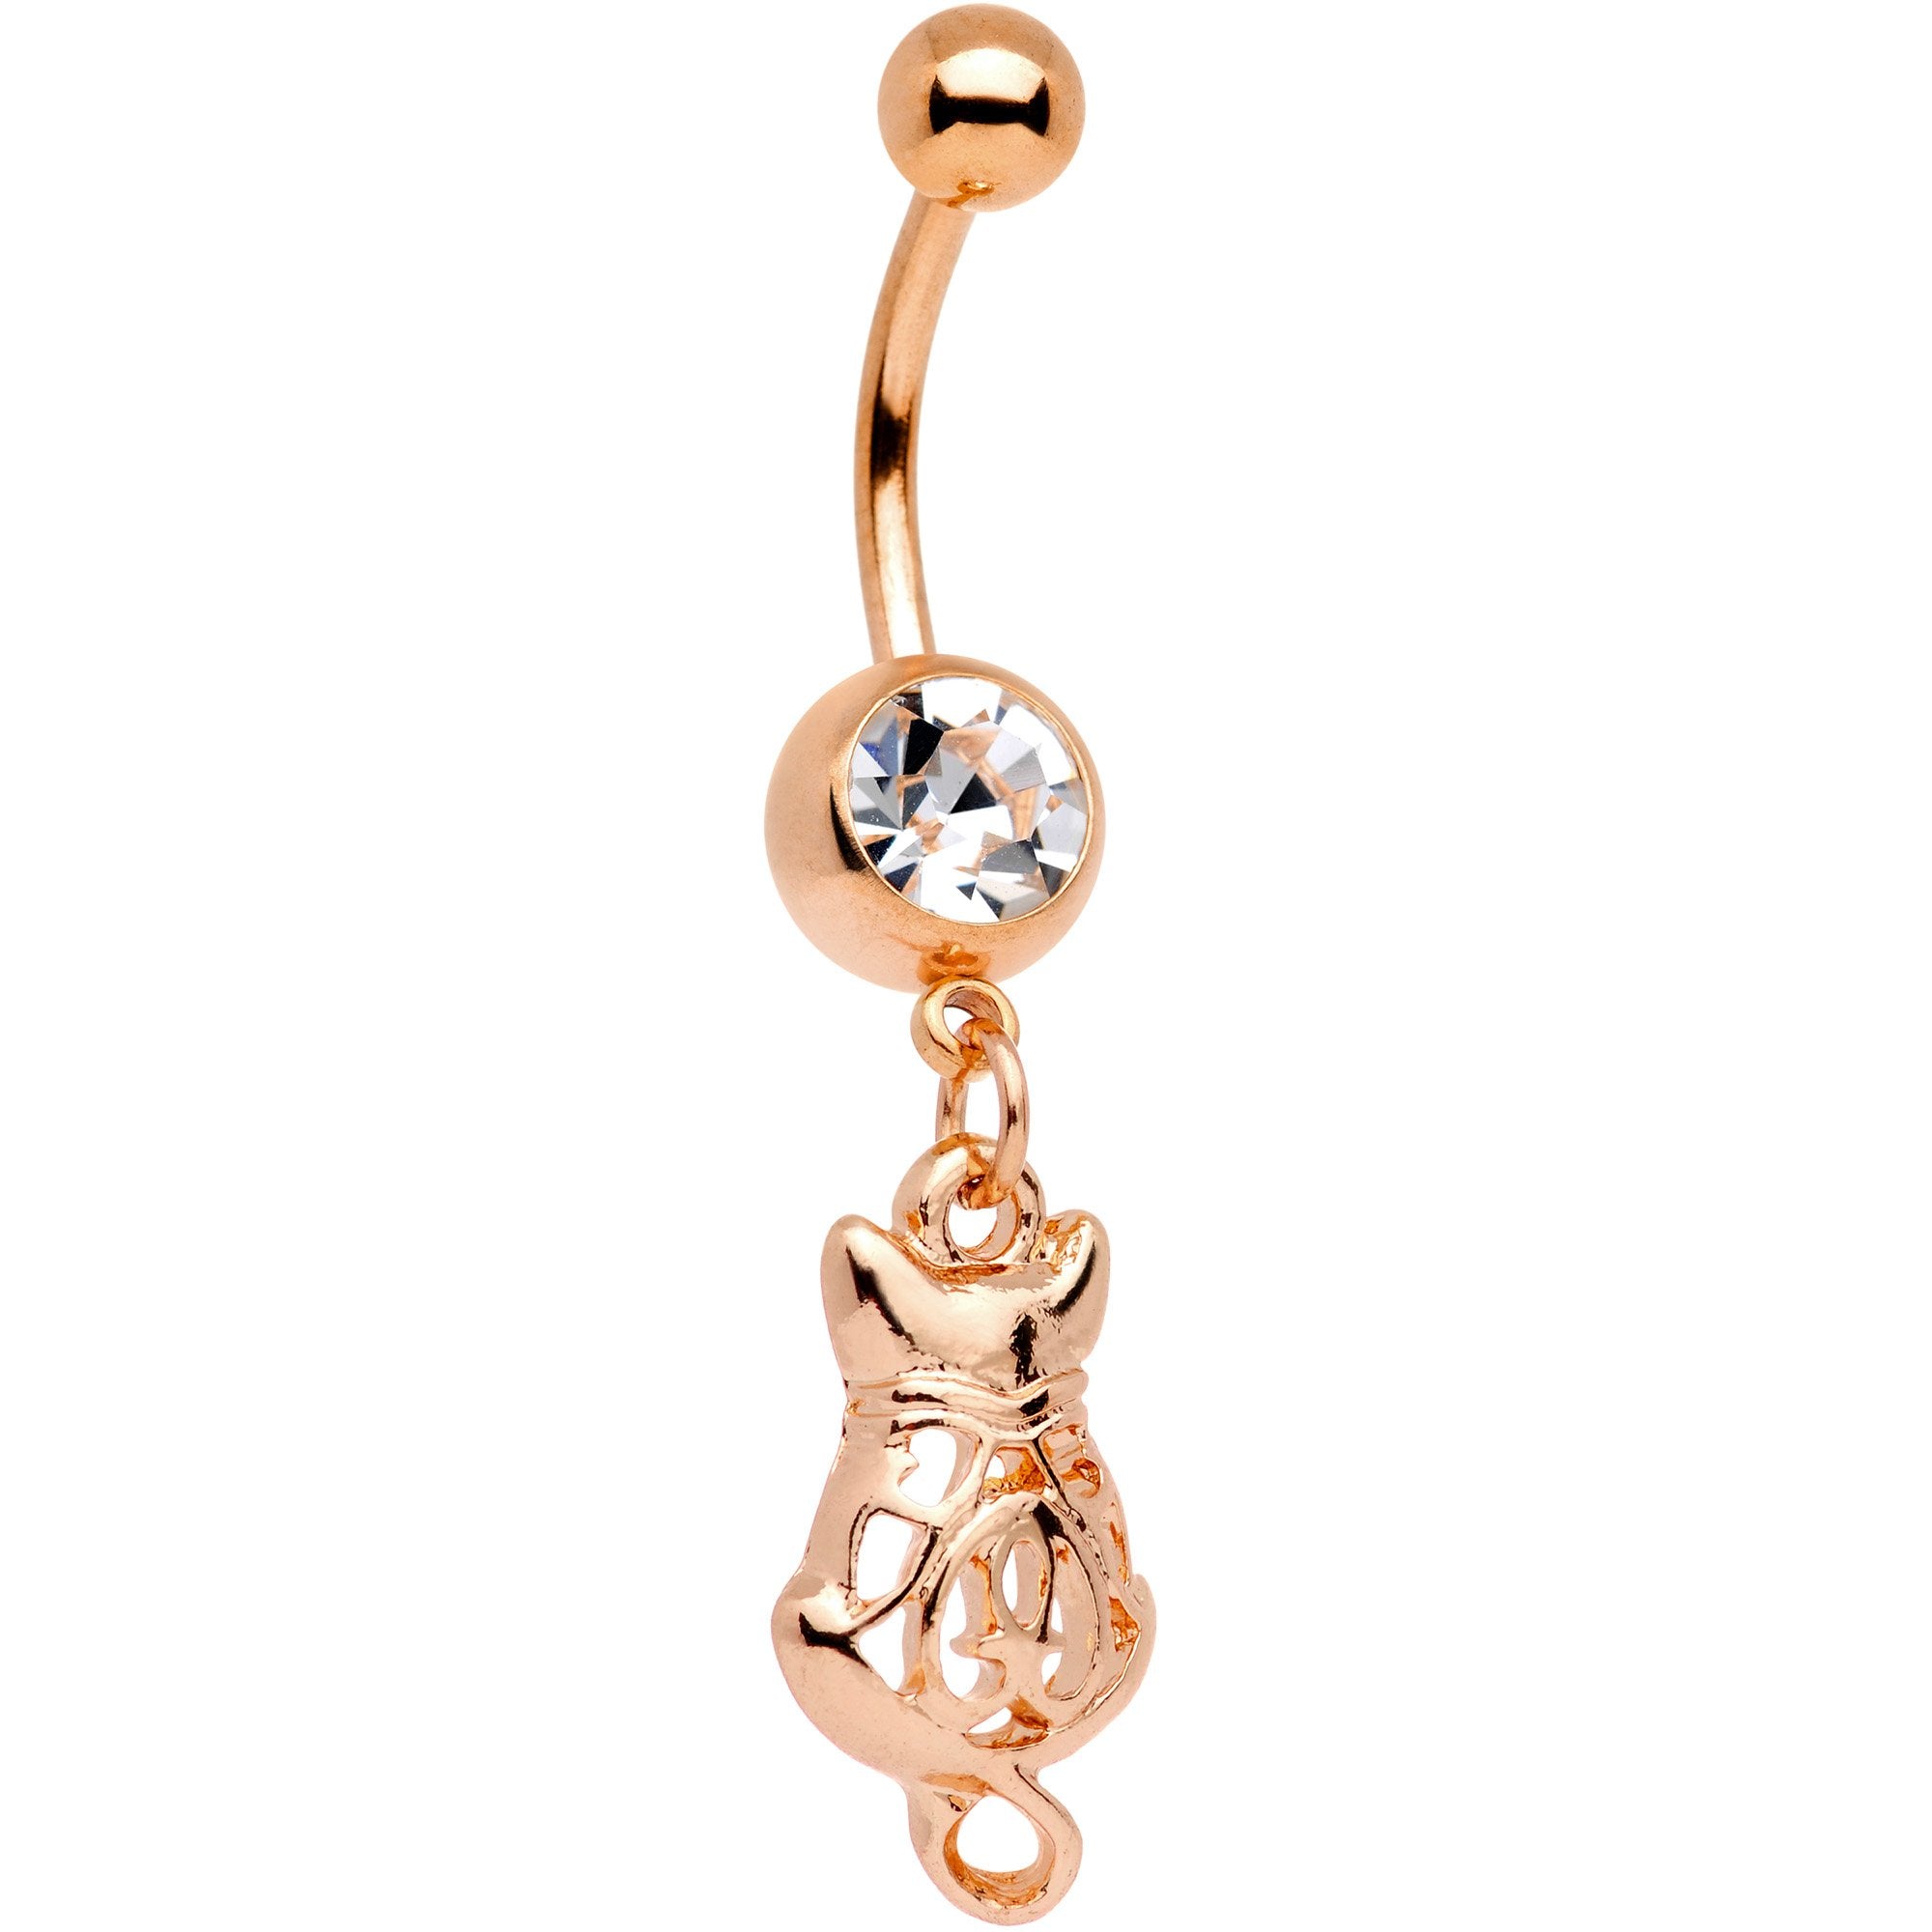 Clear Gem Rose Gold Tone Anodized Fashion Cat Dangle Belly Ring